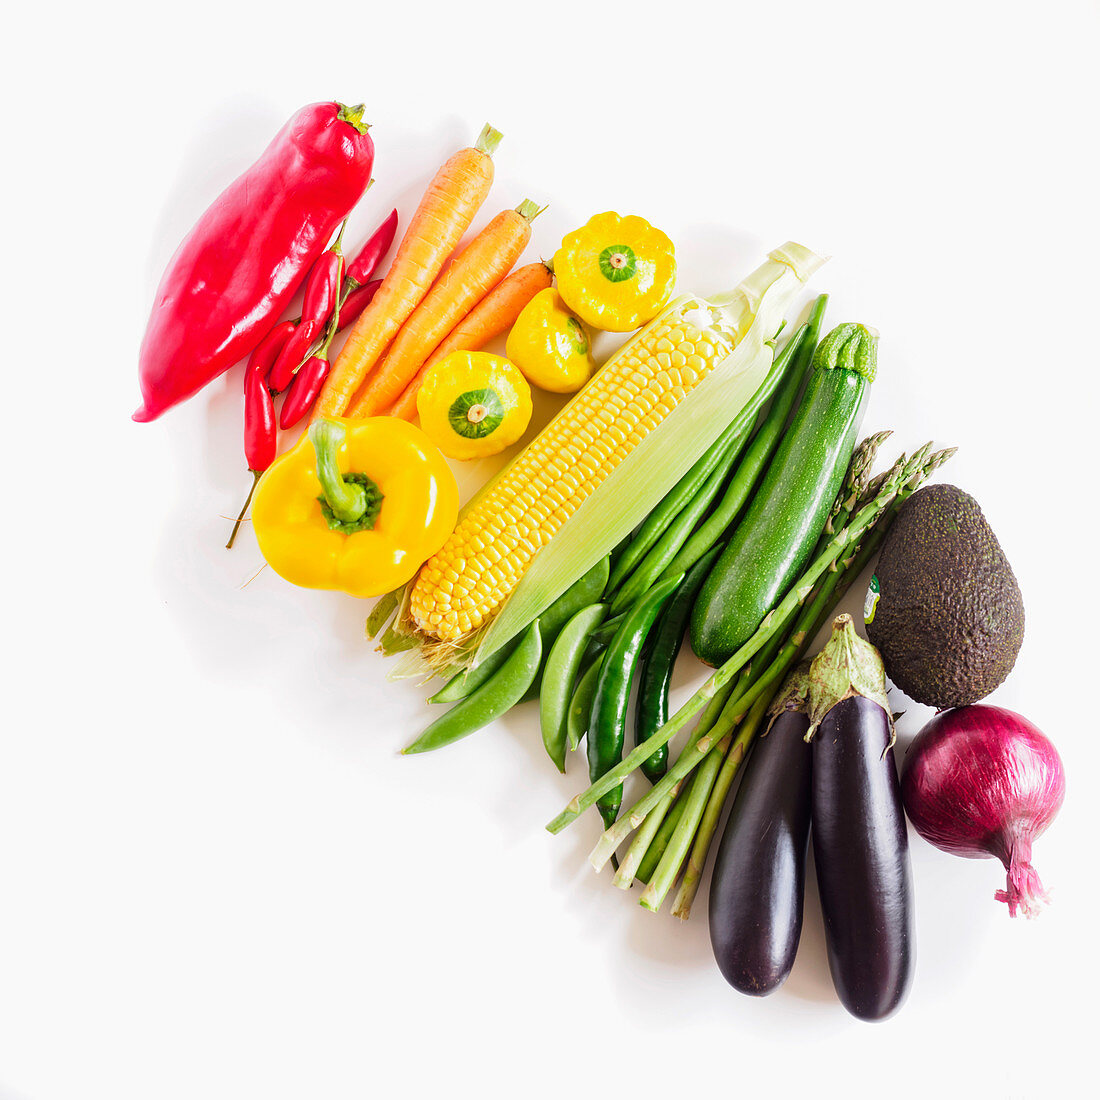 Fresh vegetables arranged by colour on a white background